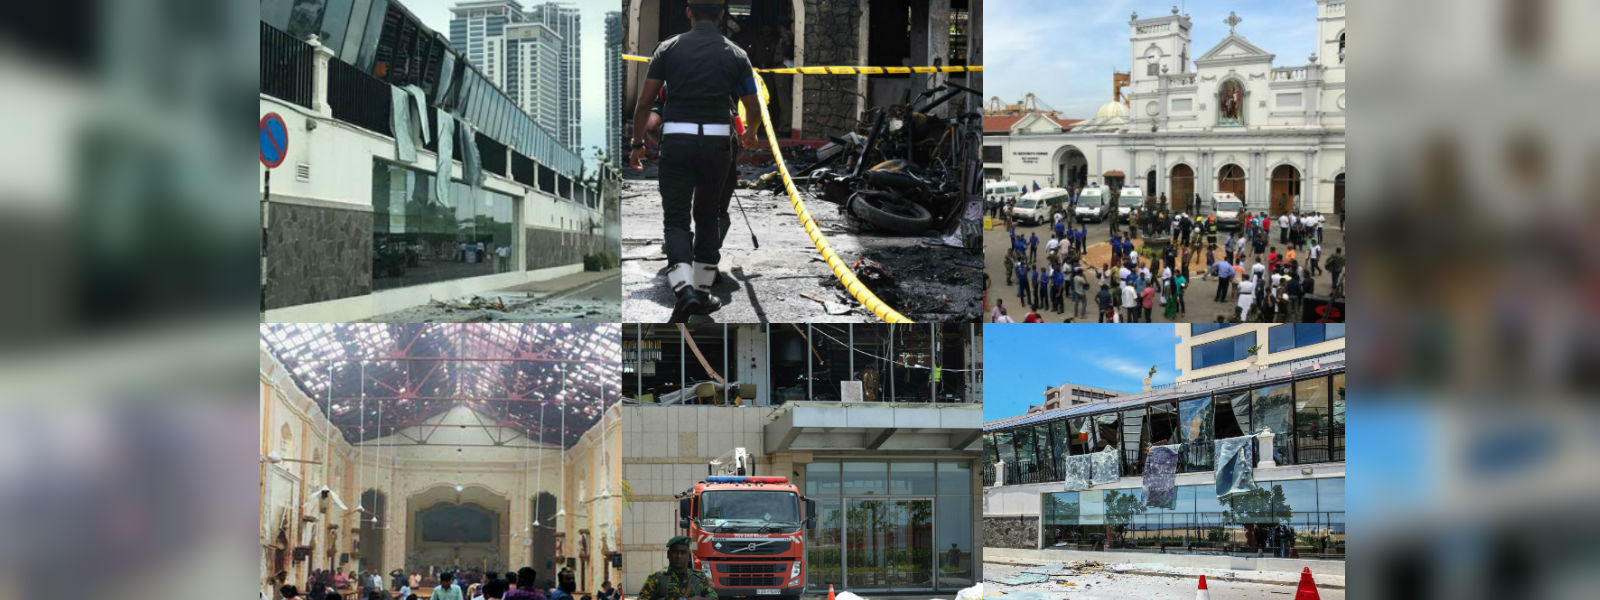 04/21 attacks: 67 suspects currently in custody